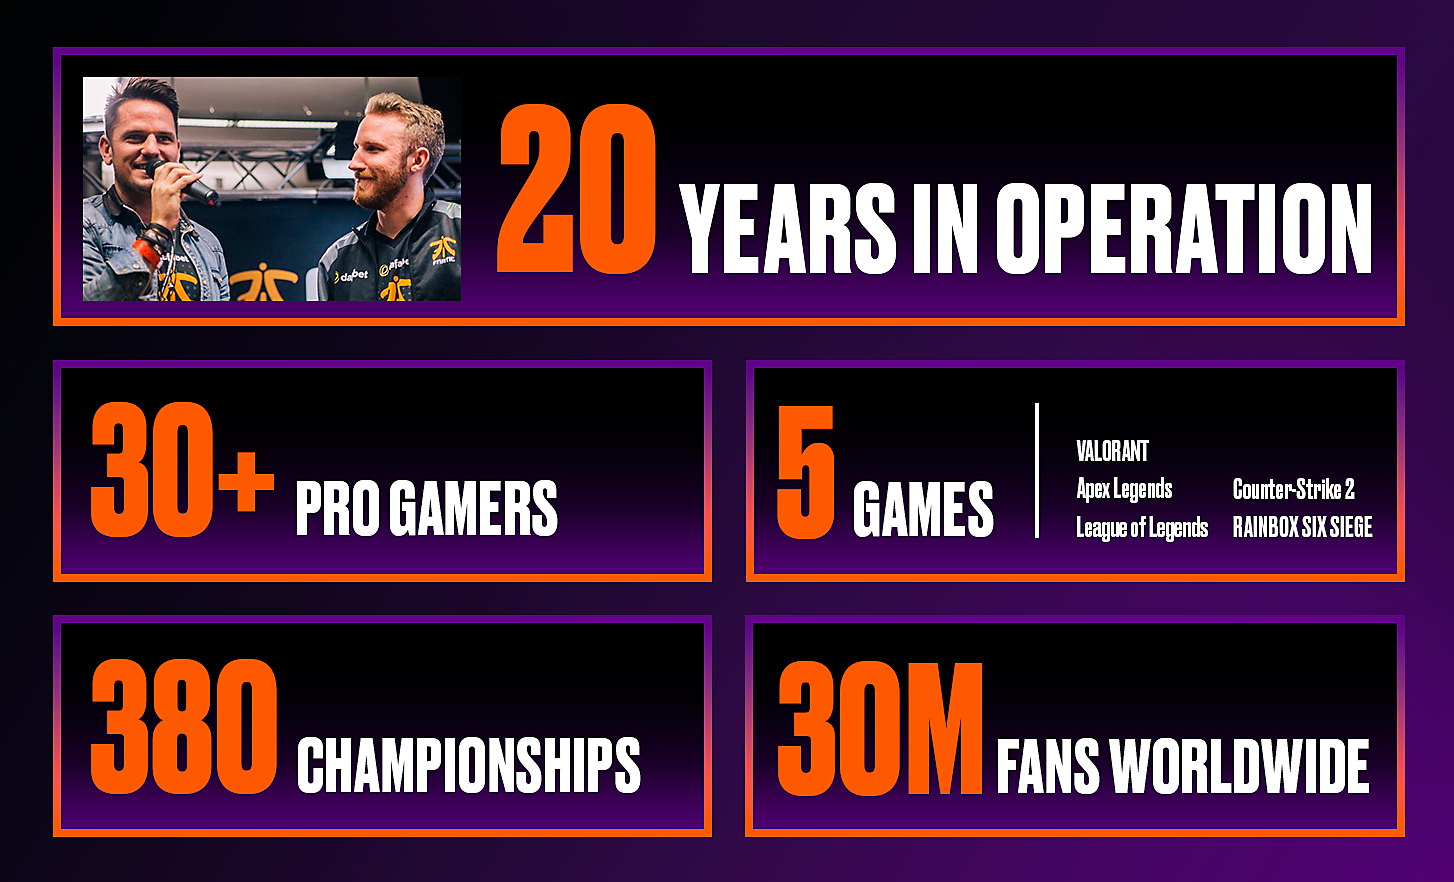 5 boxes display various Fnatic stats, including years in operation and number of pro gamers, games, championships and fans